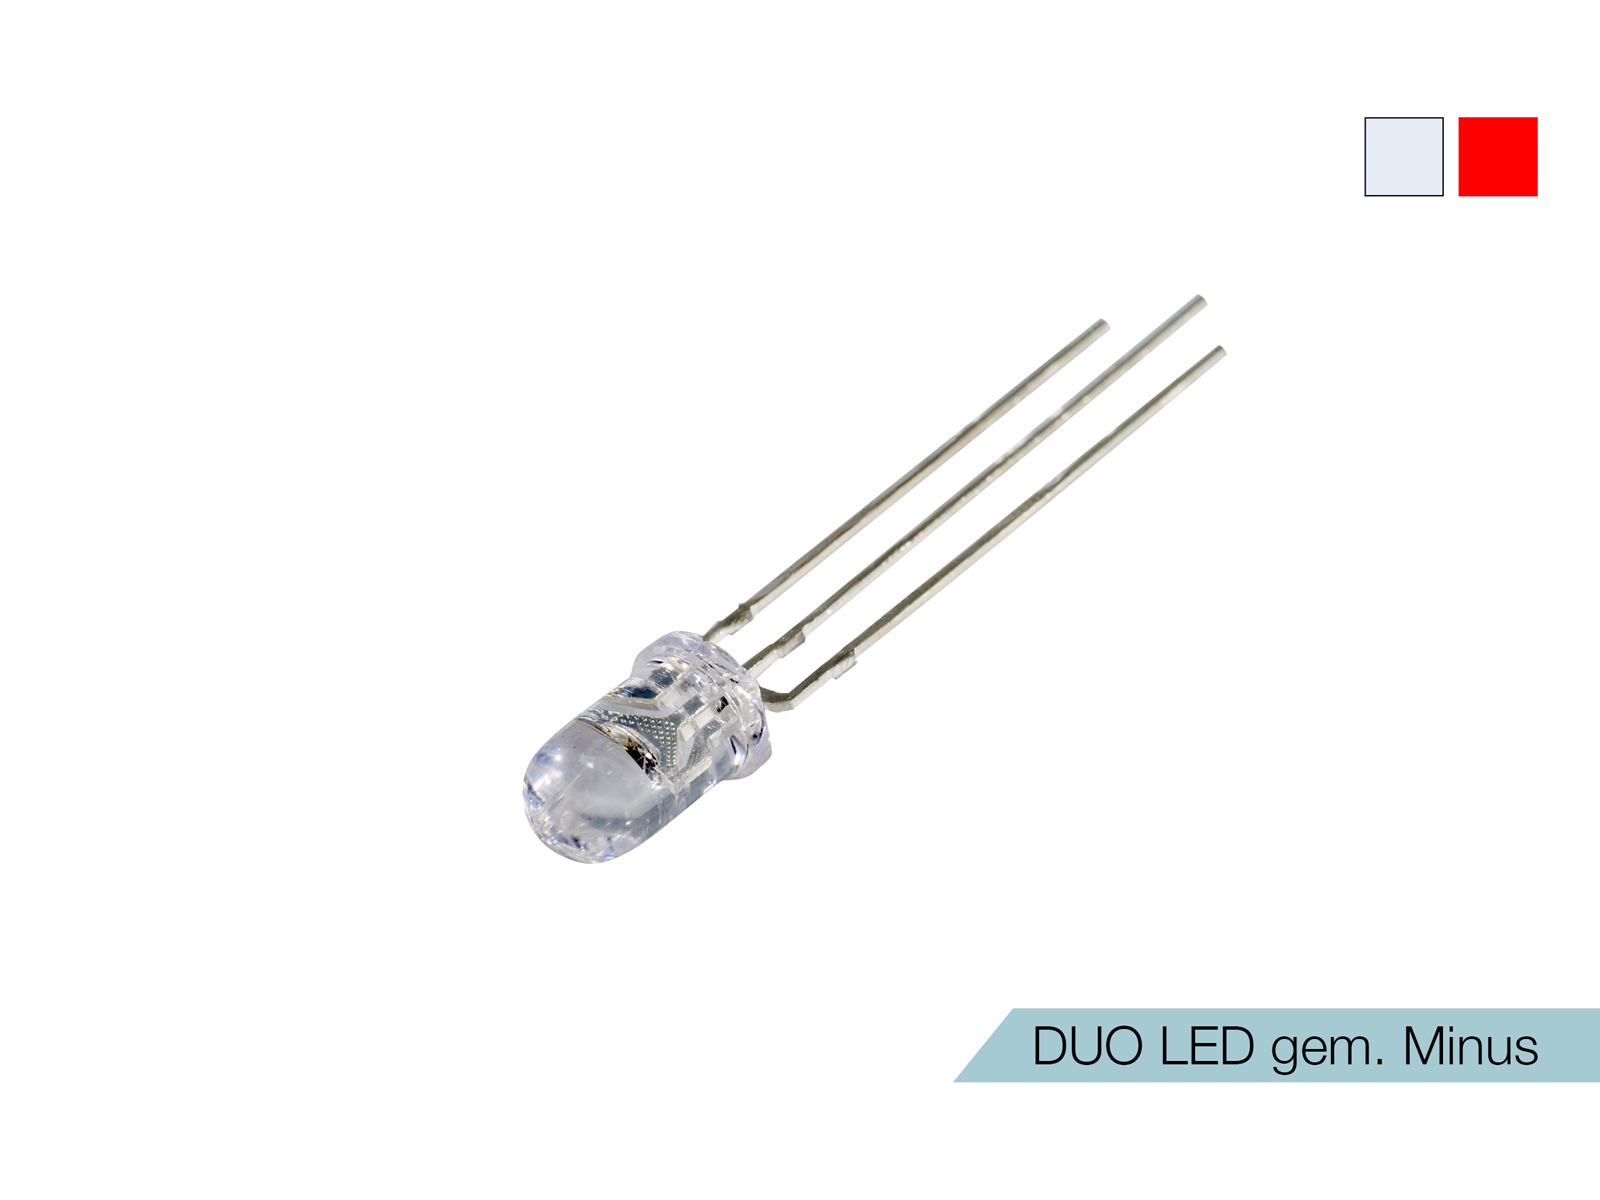 DUO LED rot/weiß LEDs 5mm ultrahell gemeinsamer MINUSPOL kaufen | PUR-LED